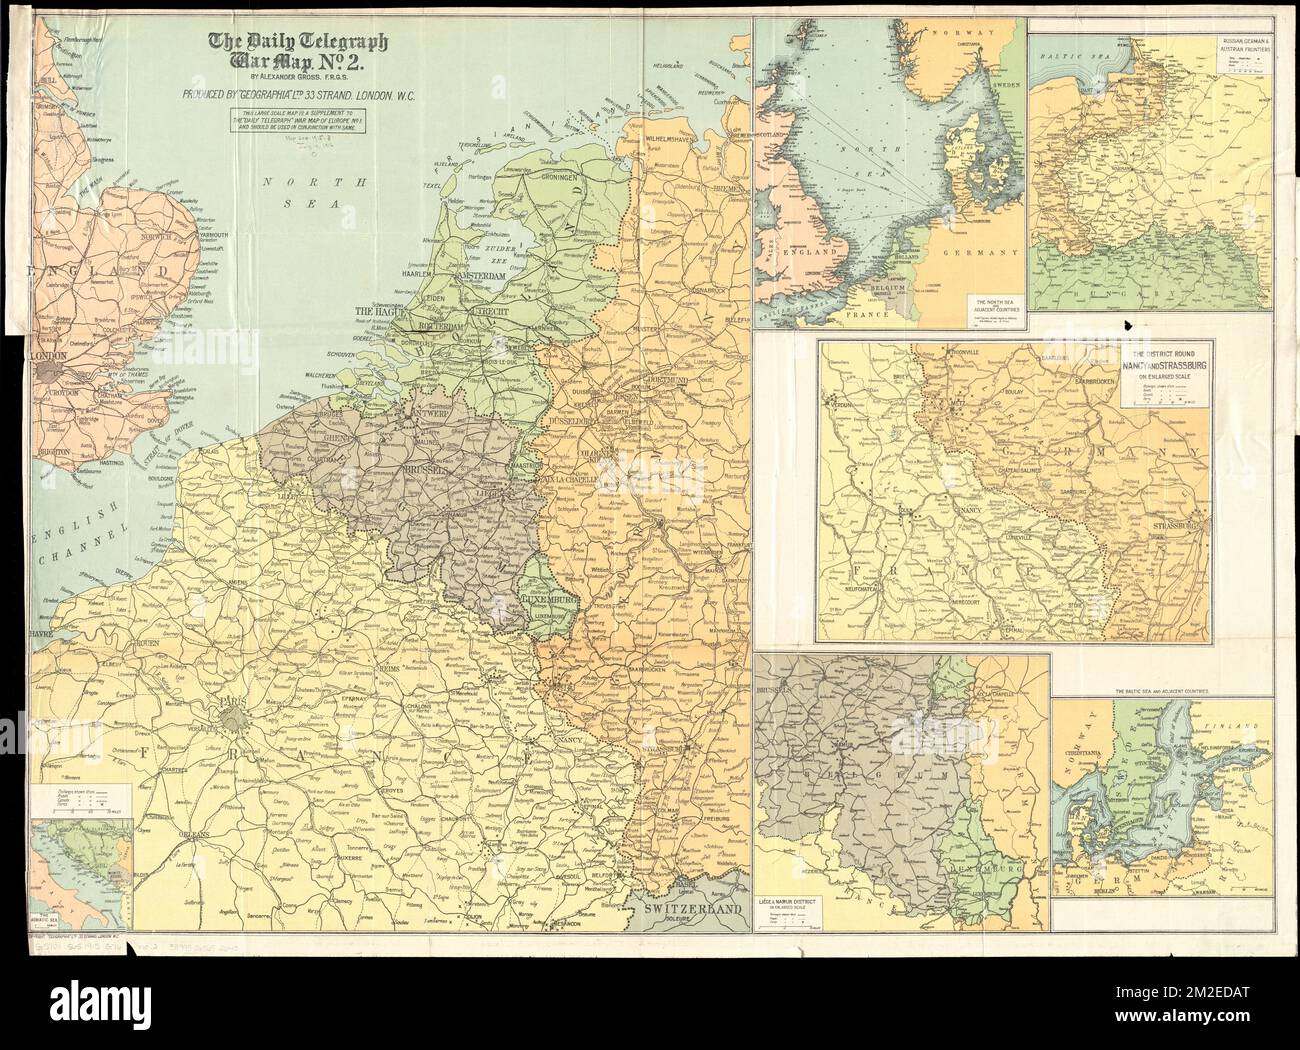 The Daily Telegraph war map no. 2 , World War, 1914-1918, Campaigns, Western Front, Maps, World War, 1914-1918, Campaigns, Europe, Maps, World War, 1914-1918, Europe, Maps, Europe, Maps, North Sea Region, Maps Norman B. Leventhal Map Center Collection Stock Photo